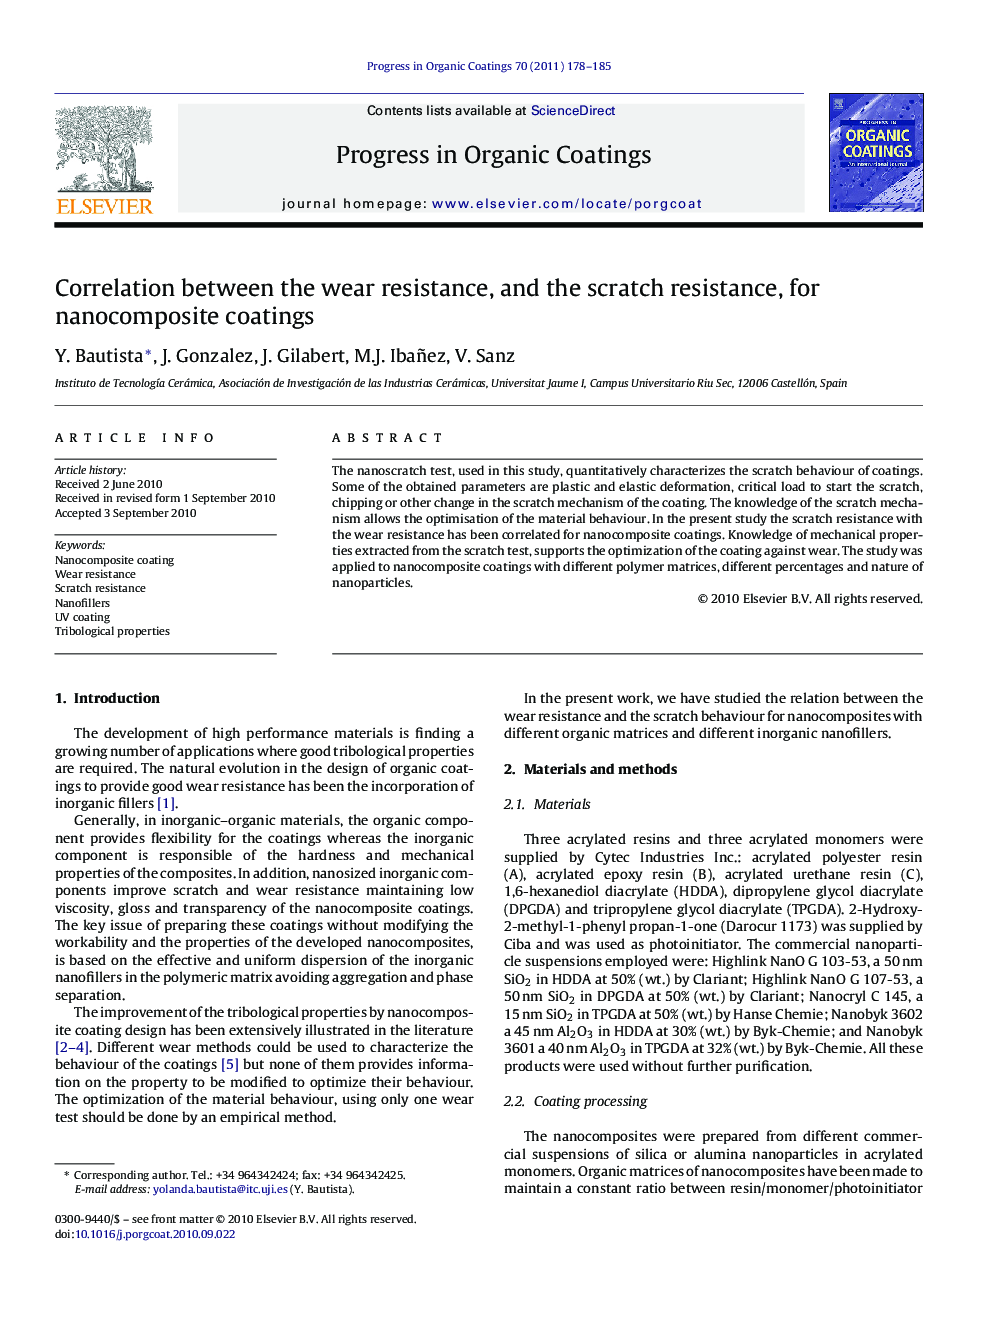 Correlation between the wear resistance, and the scratch resistance, for nanocomposite coatings